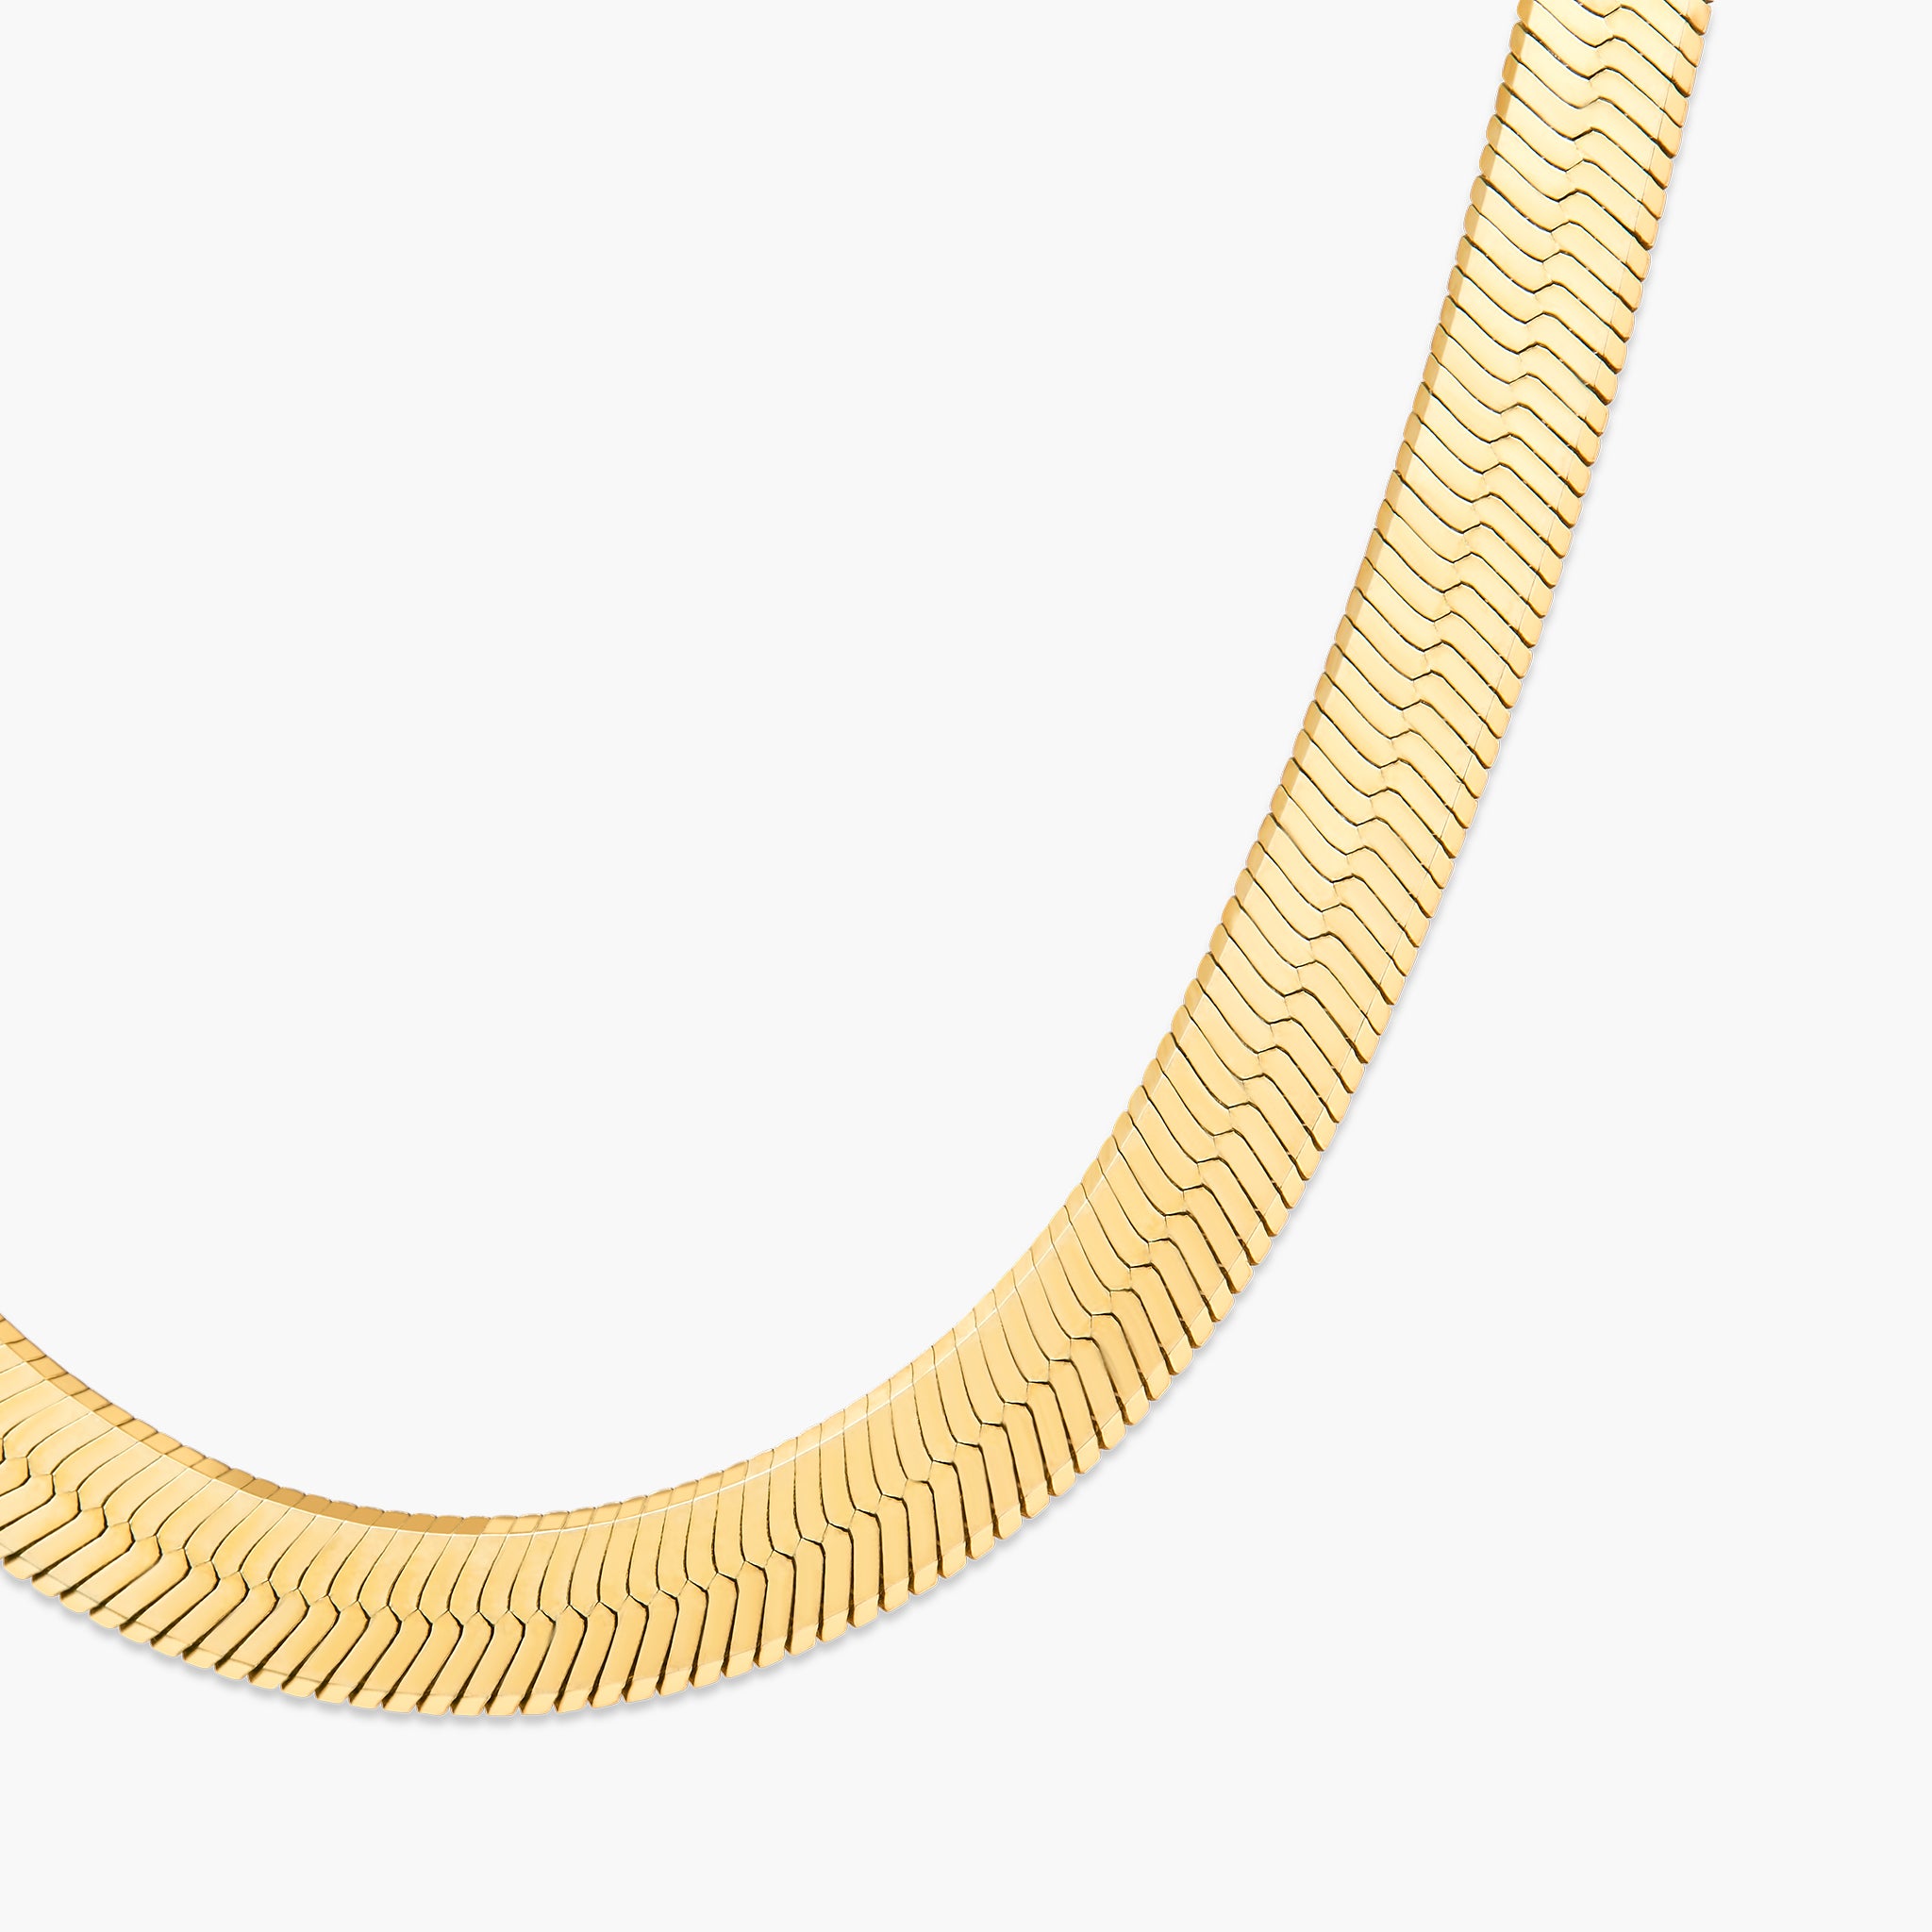 1165 - 5mm Solid Gold Herringbone Necklace